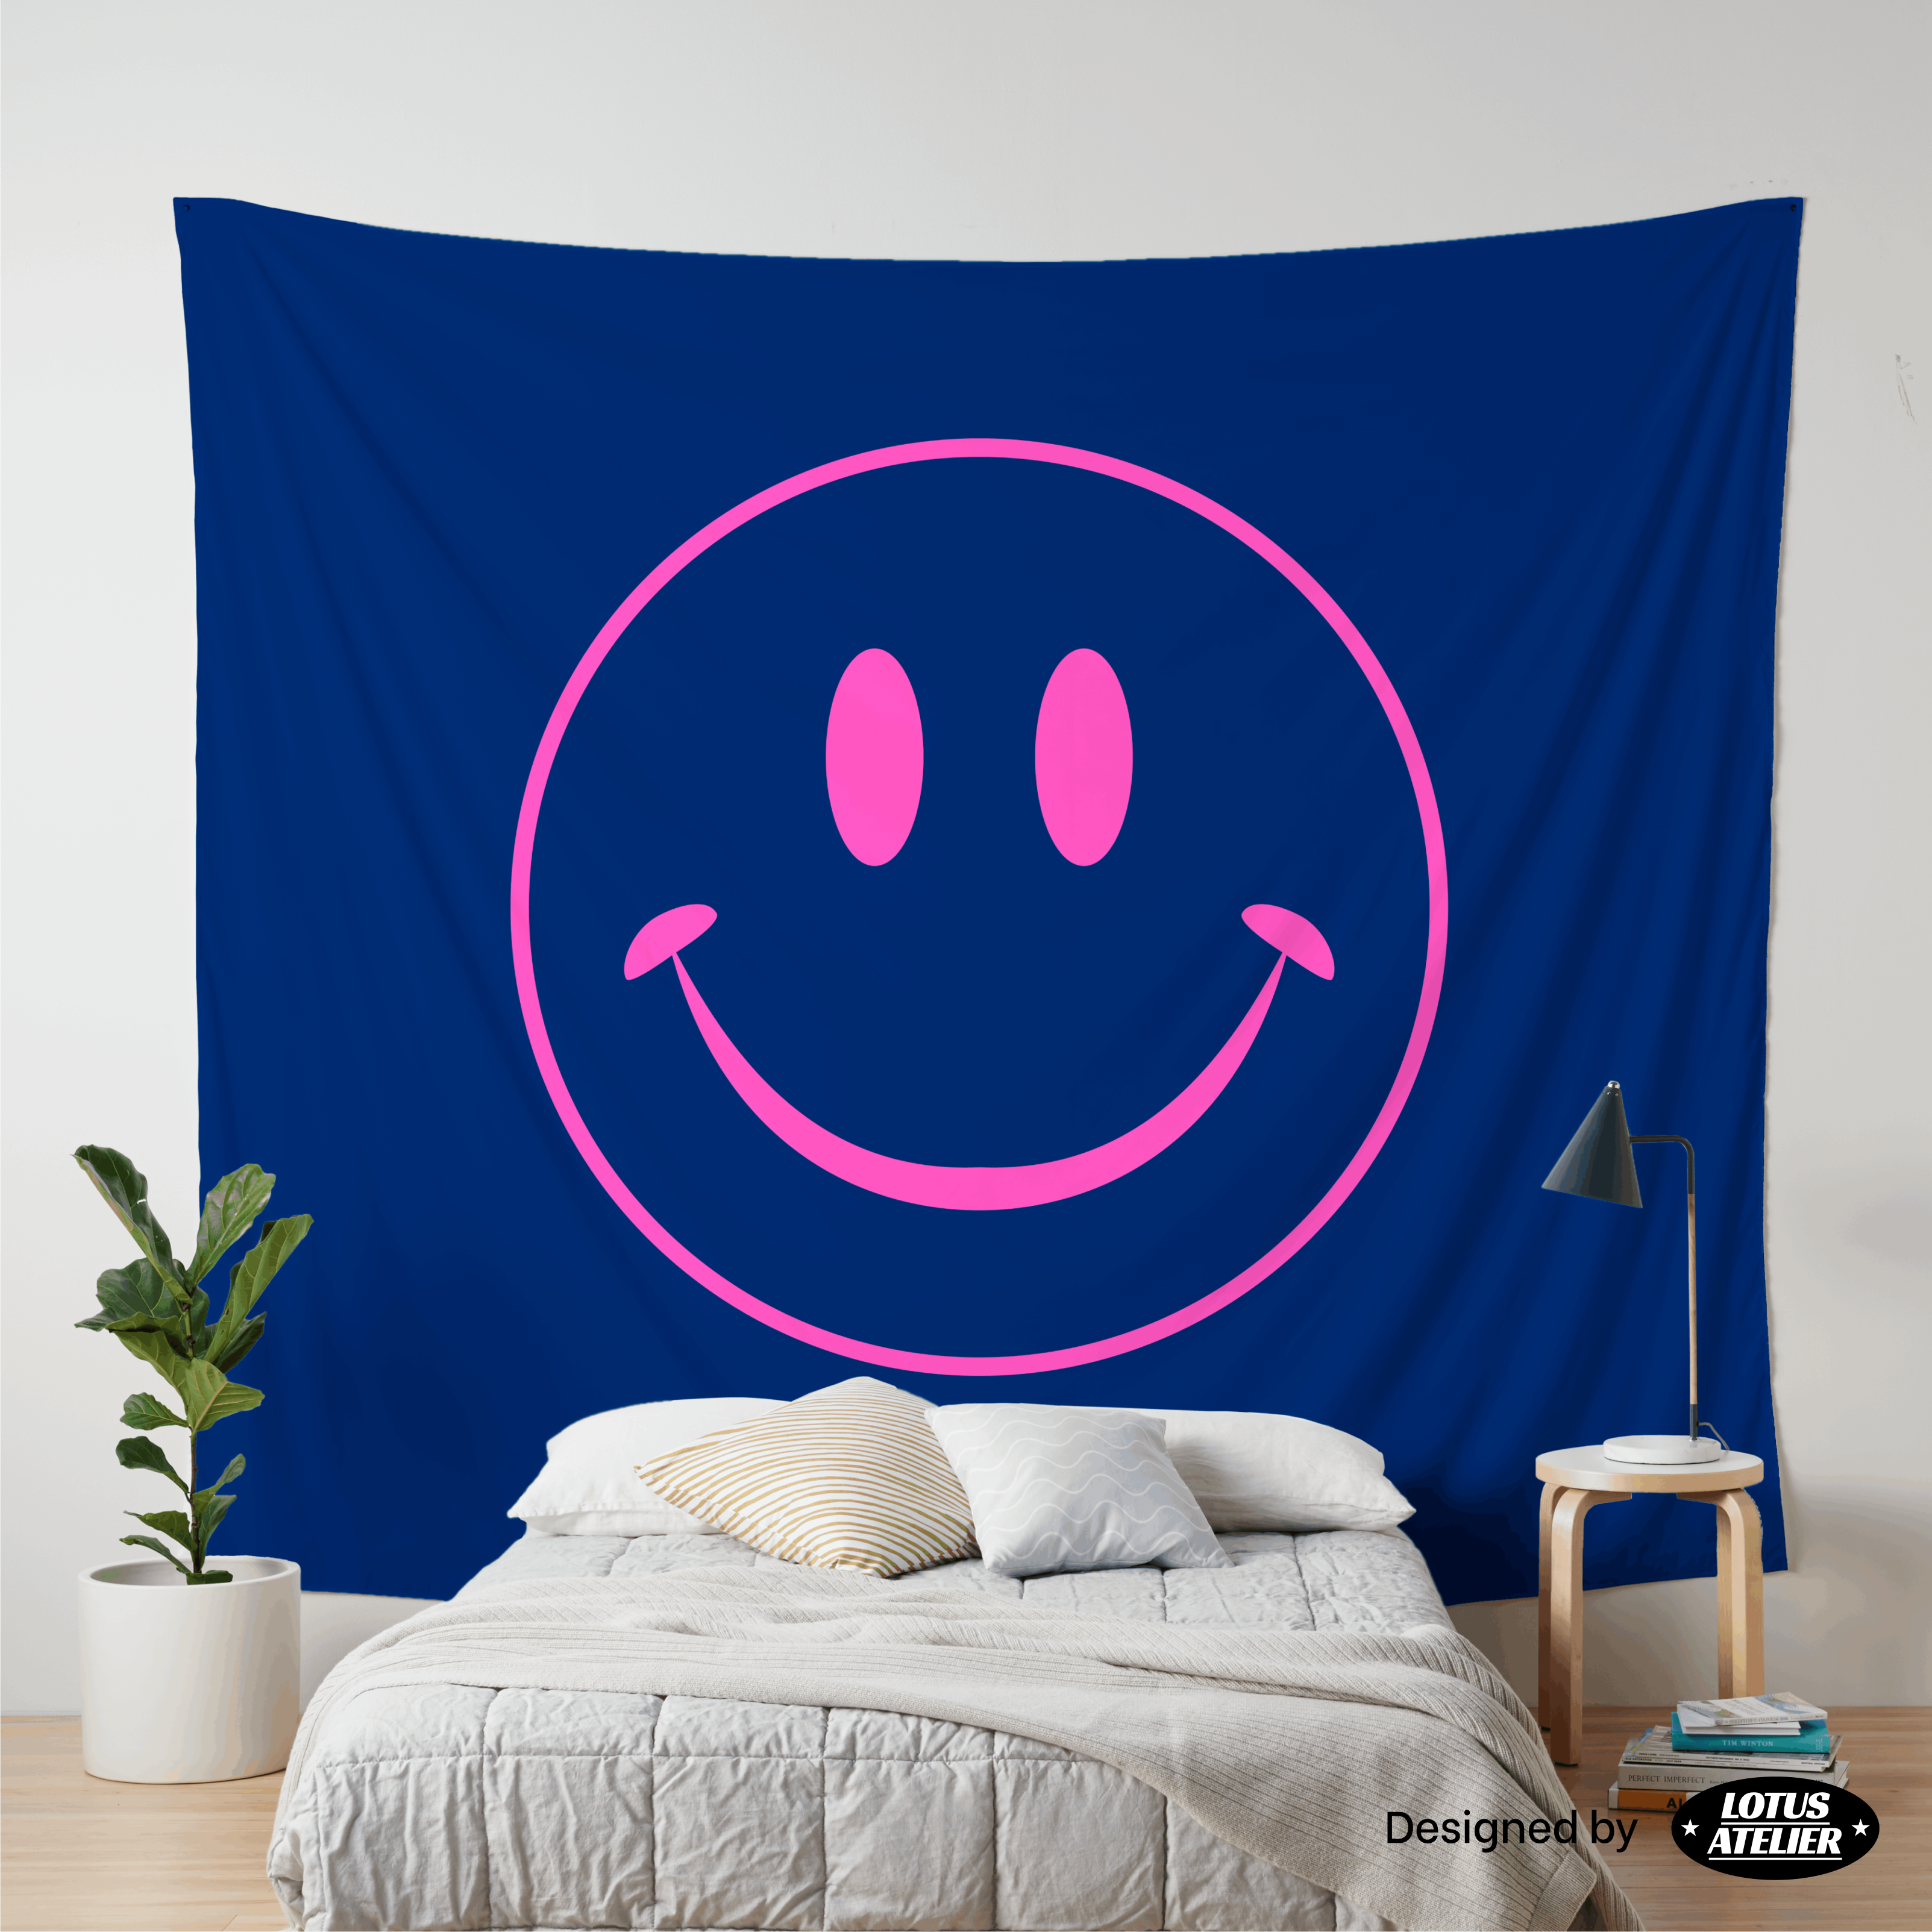 Smiley Tapestry